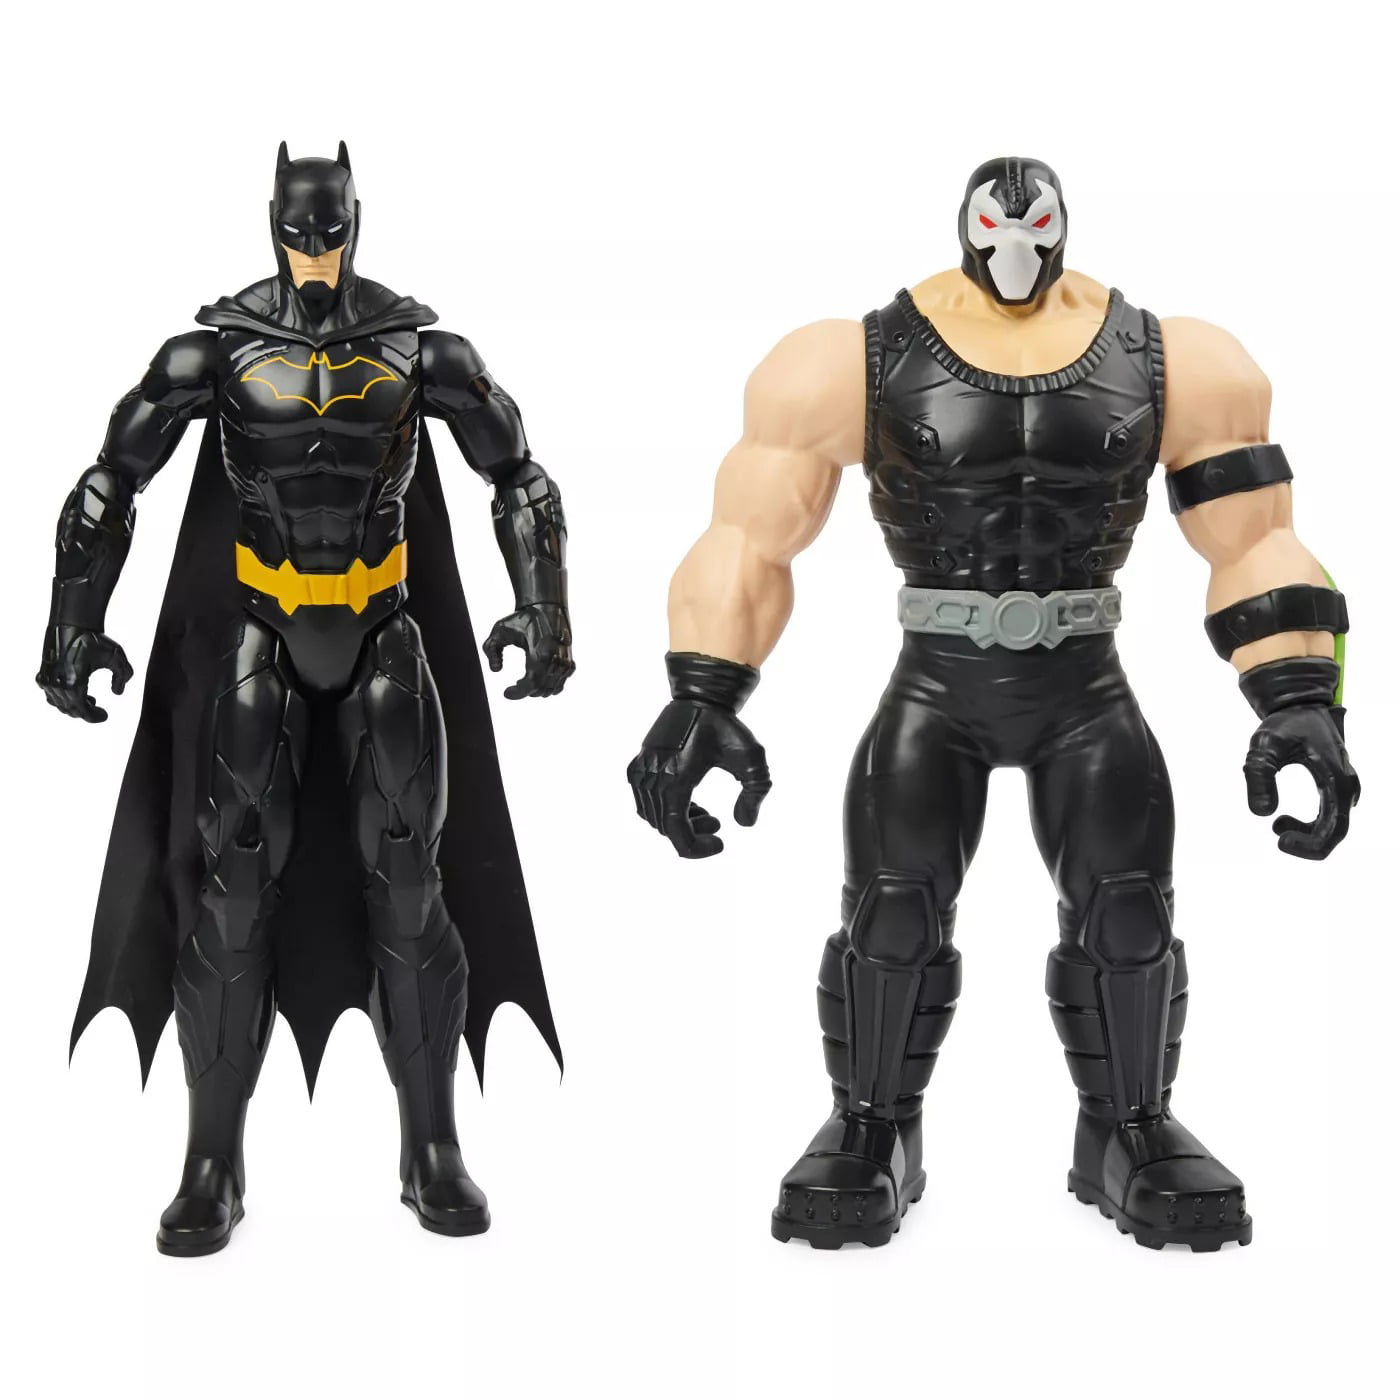 New DC Spin Master BATMAN VS BANE 12” Exclusive Action Figure 1st Edition 